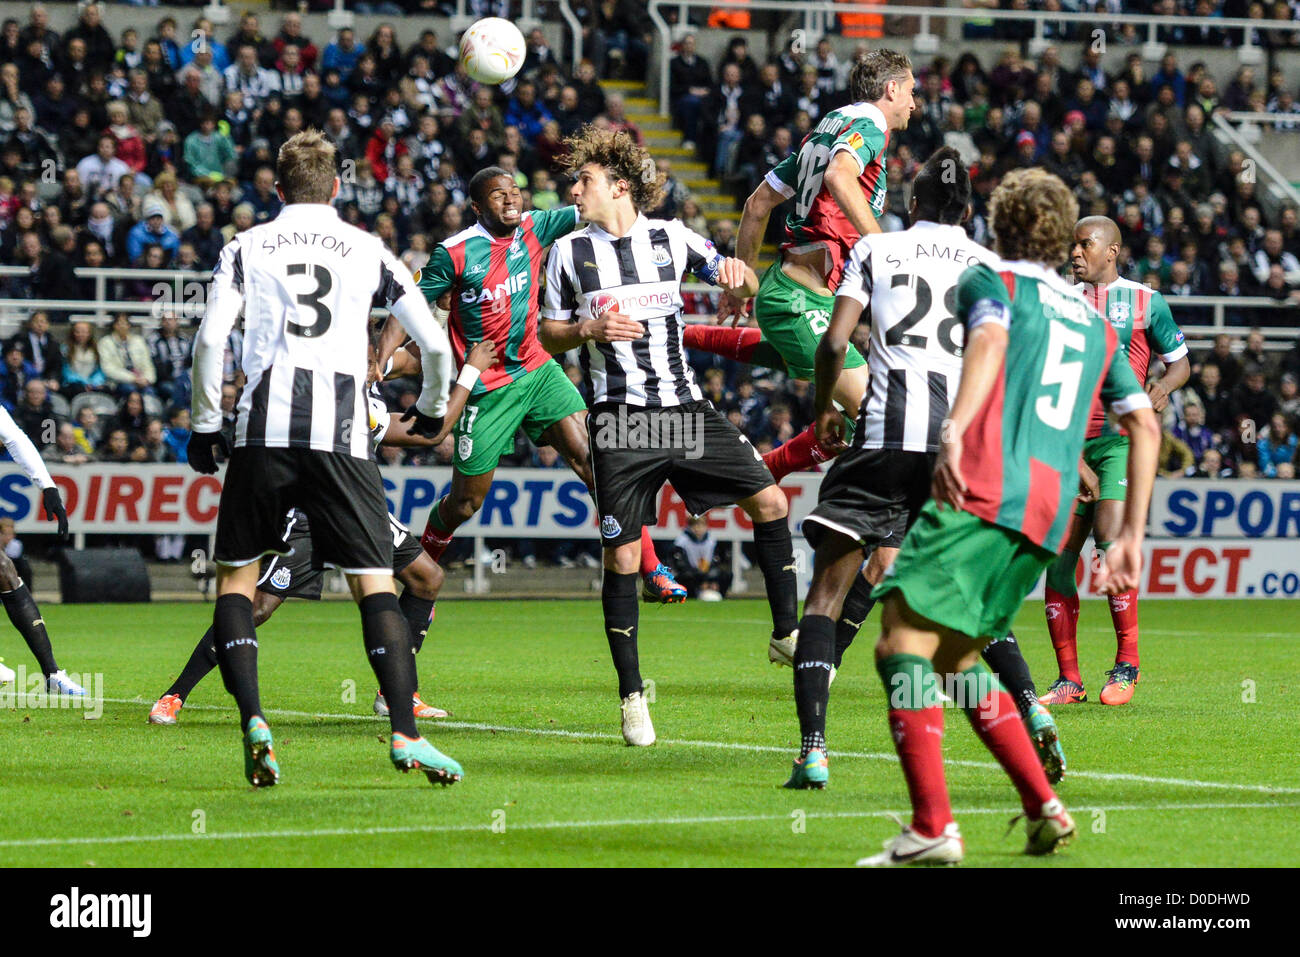 22.11.2012 Newcastle, England. Sami and Newcastle Captain Fabricio Coloccini in action during the Europa League game between Newcastle and Maritimo from St James Park. Stock Photo